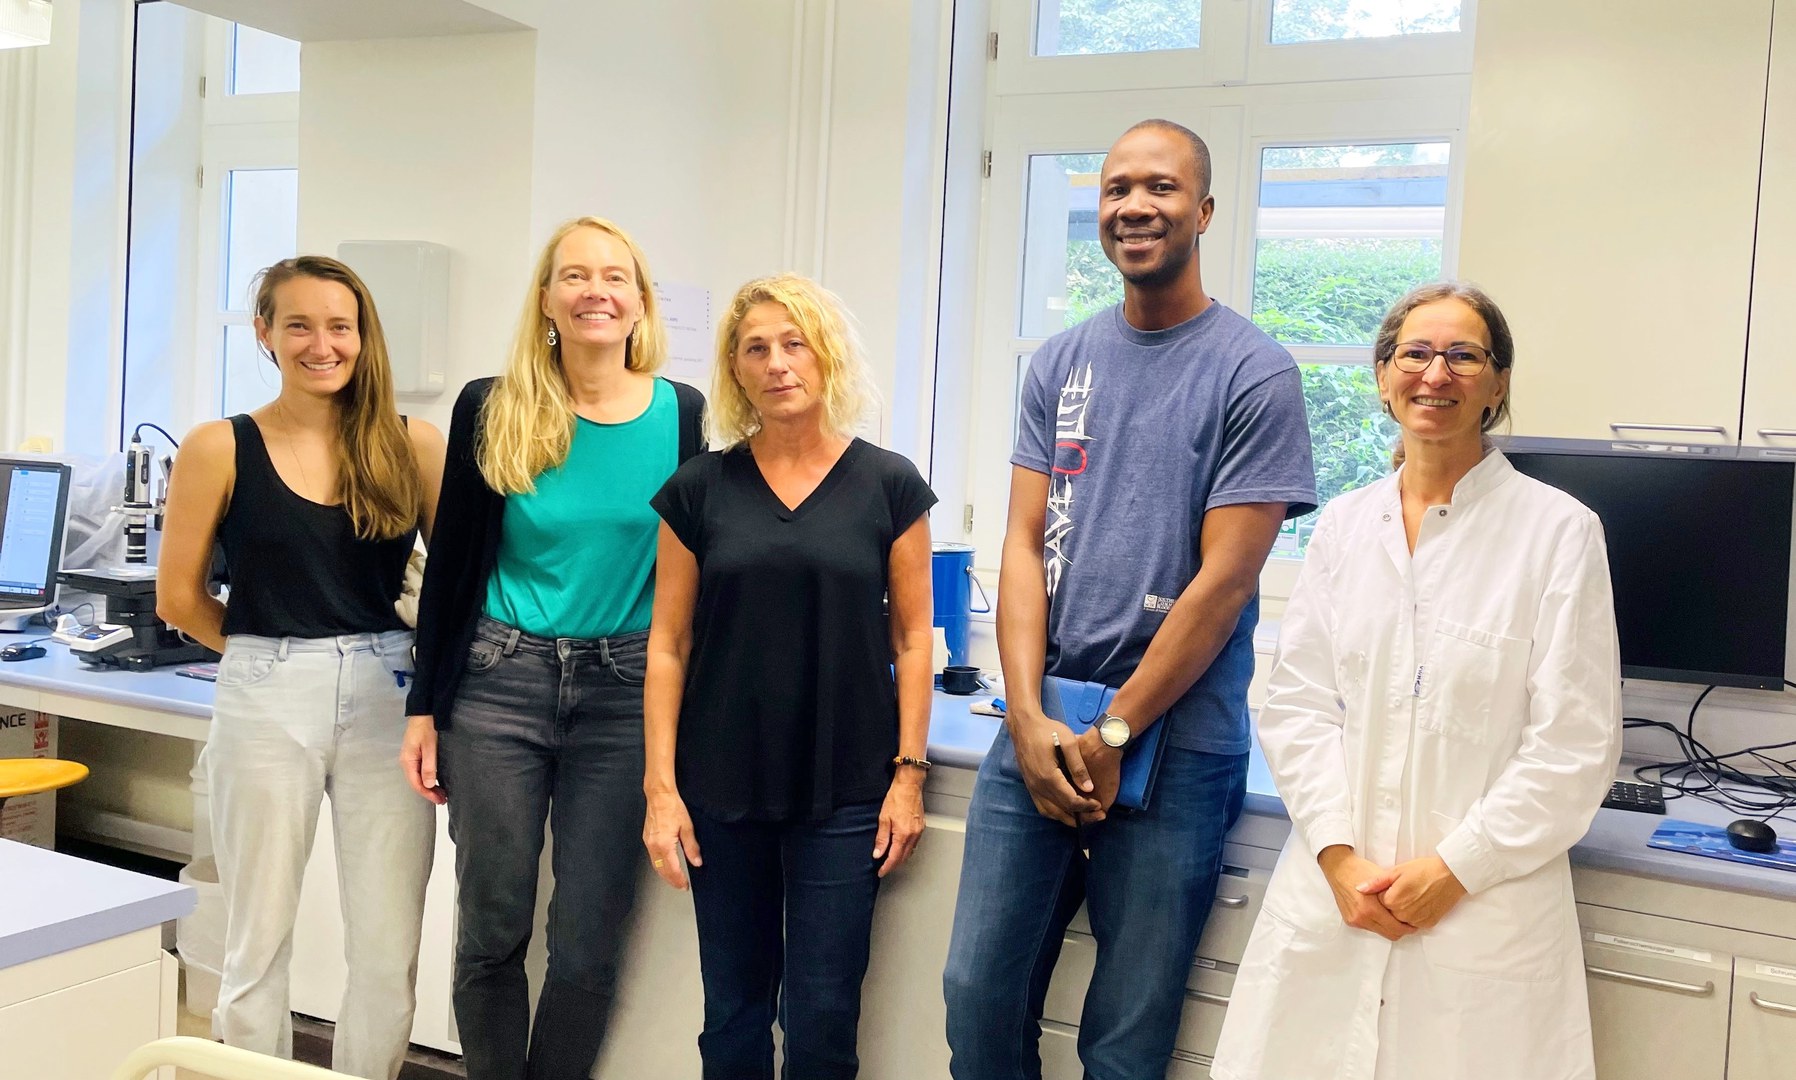 Uni Bonn Santander Grant beneficiary for research stay in the GIUB laboratory with Katja Höreth, Dr. Simone Giertz, Prof. Mariele Evers and Gabriele Kraus